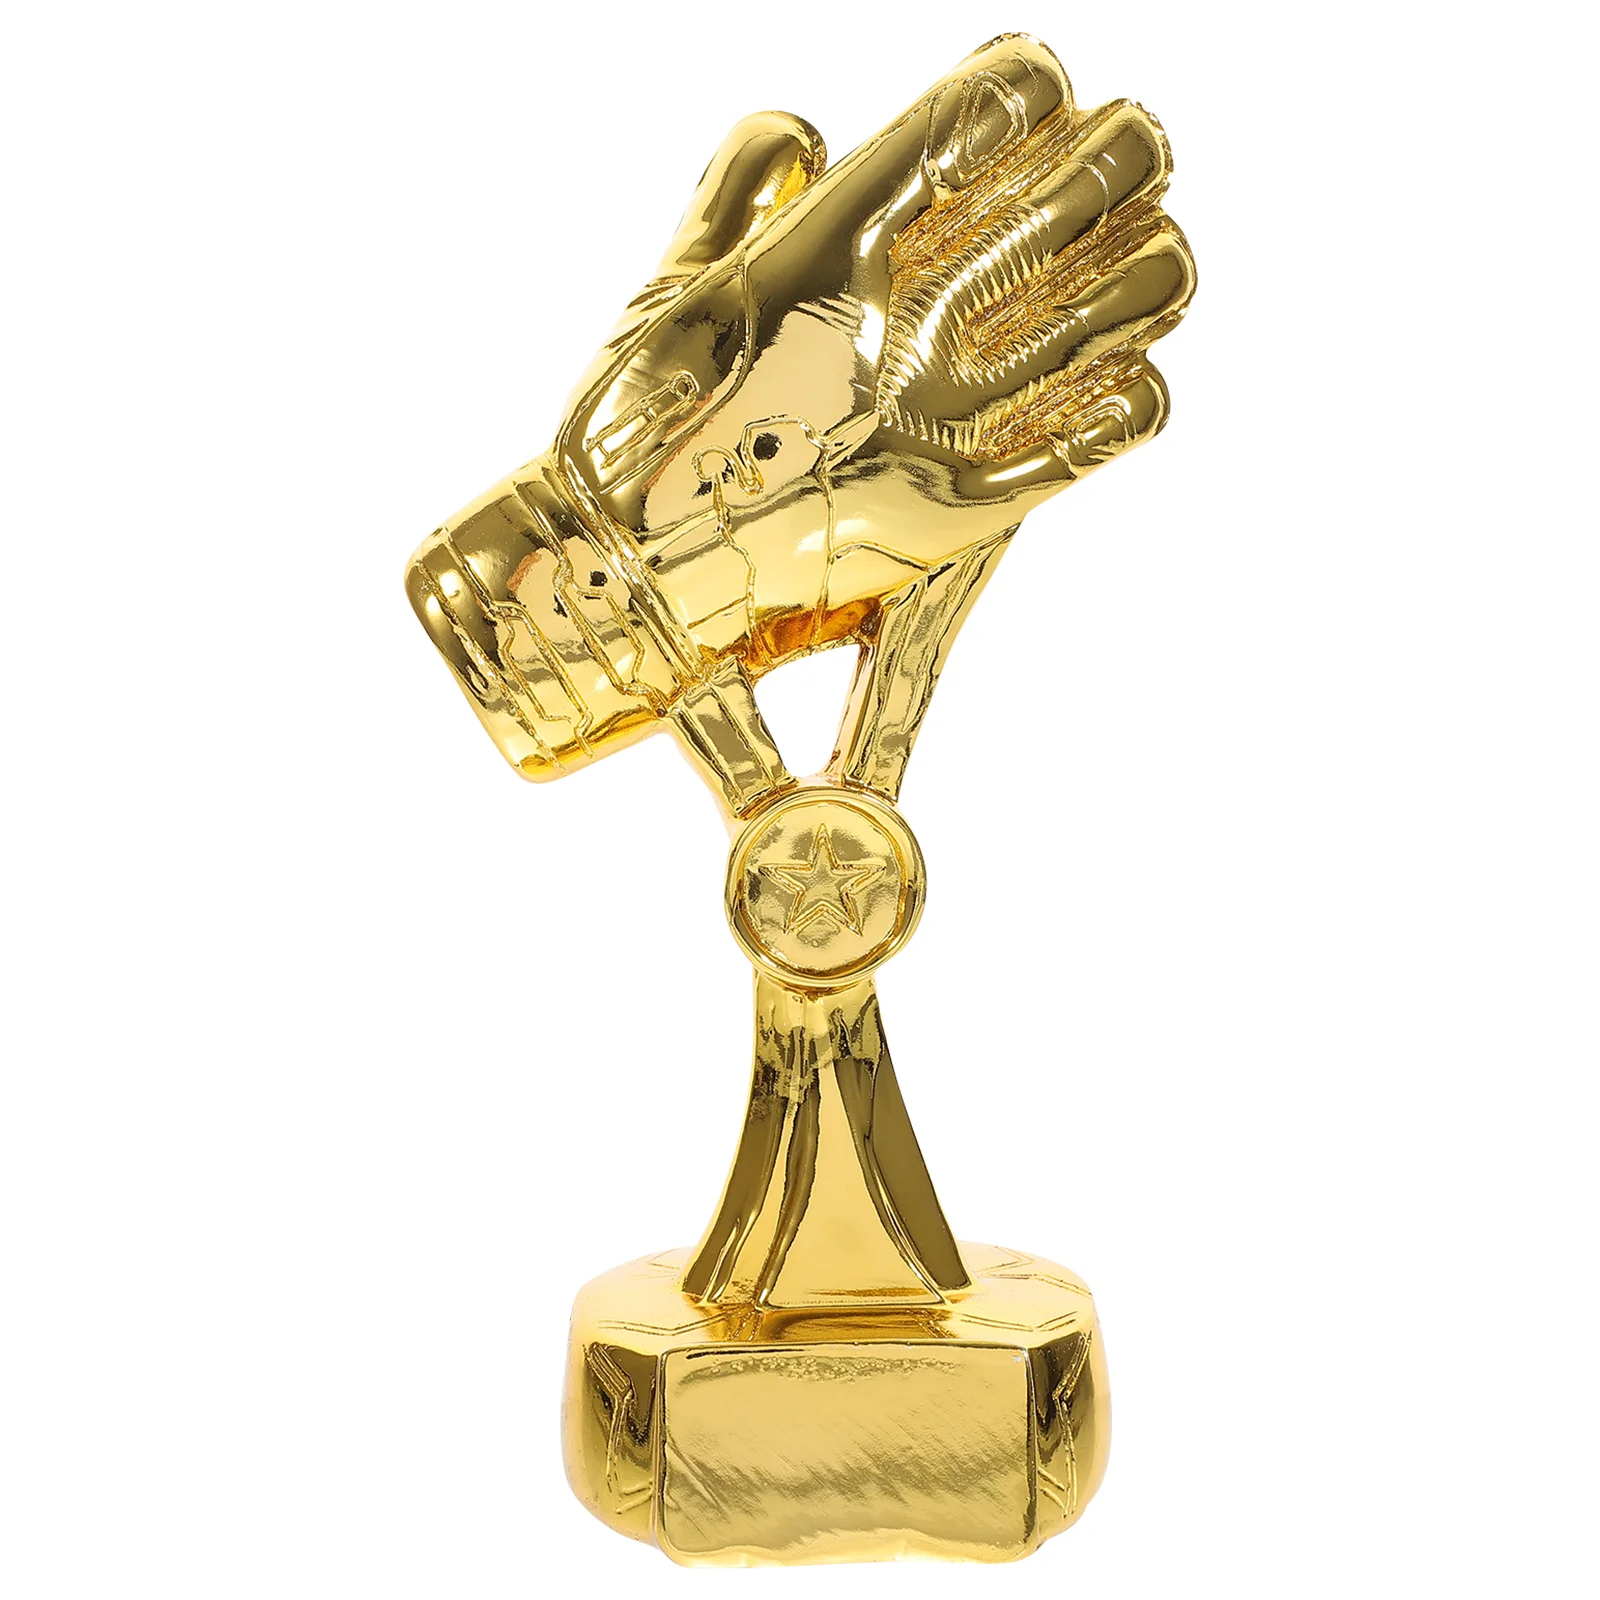 

Glove Trophy Exquisite Soccer Match Award Baseball Decorations Home Small Goalkeeper Gloves Kids Delicate Football trophies